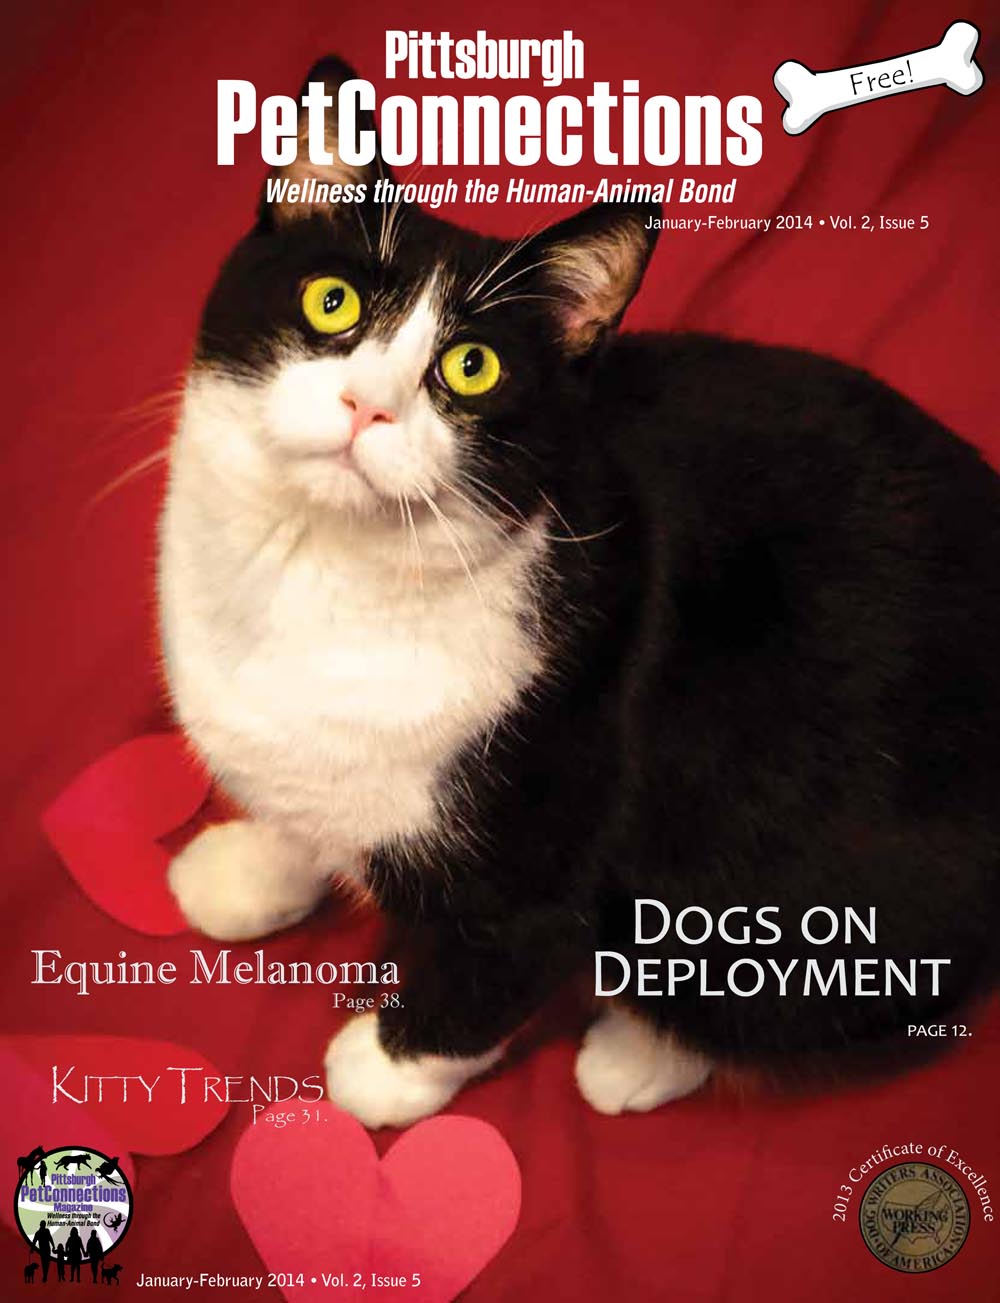 pittsburgh petconnections magazine cover